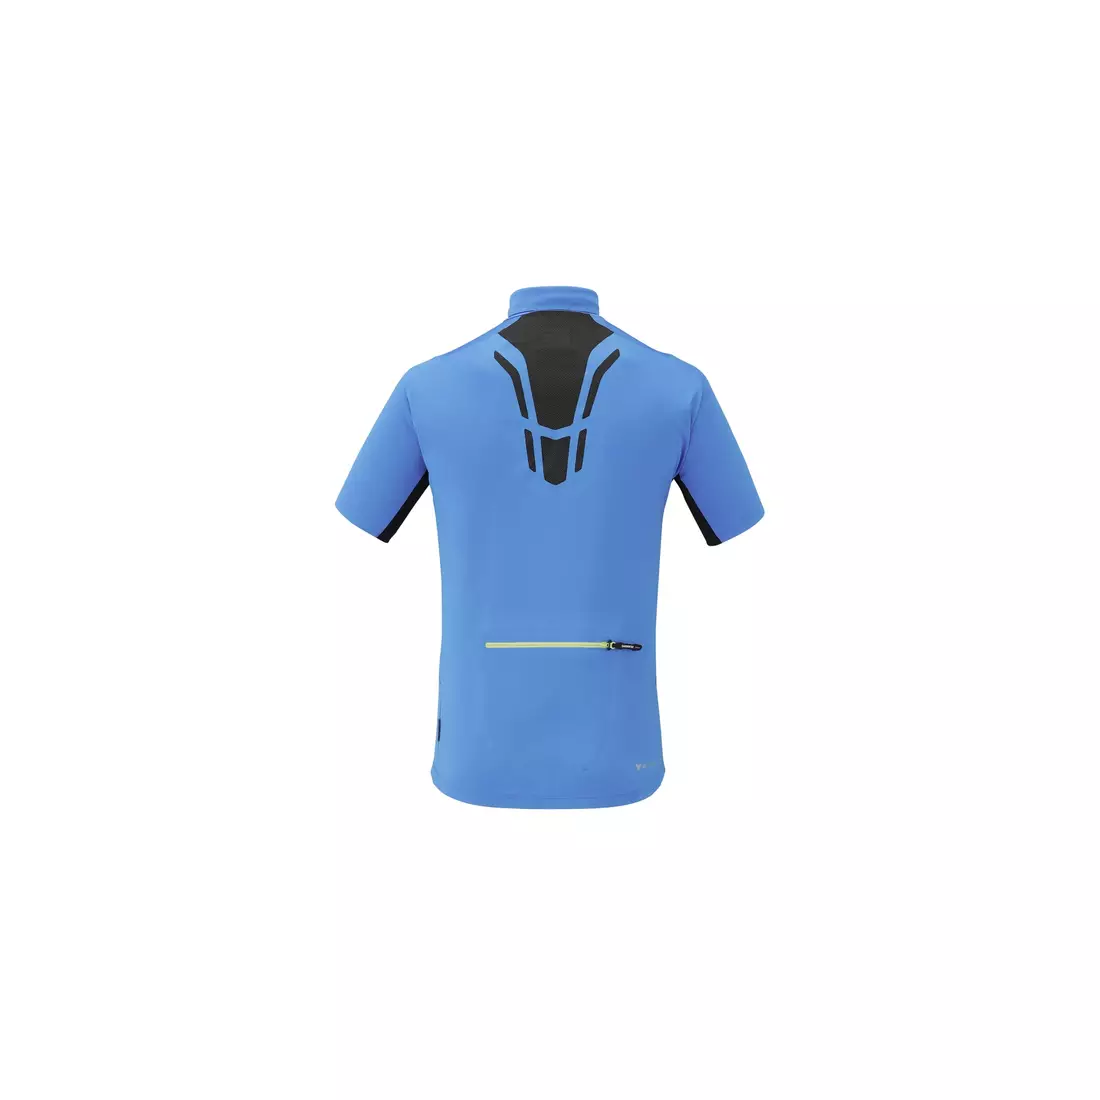 SHIMANO POLO men's cycling jersey, blue CWJSTSMS31MH